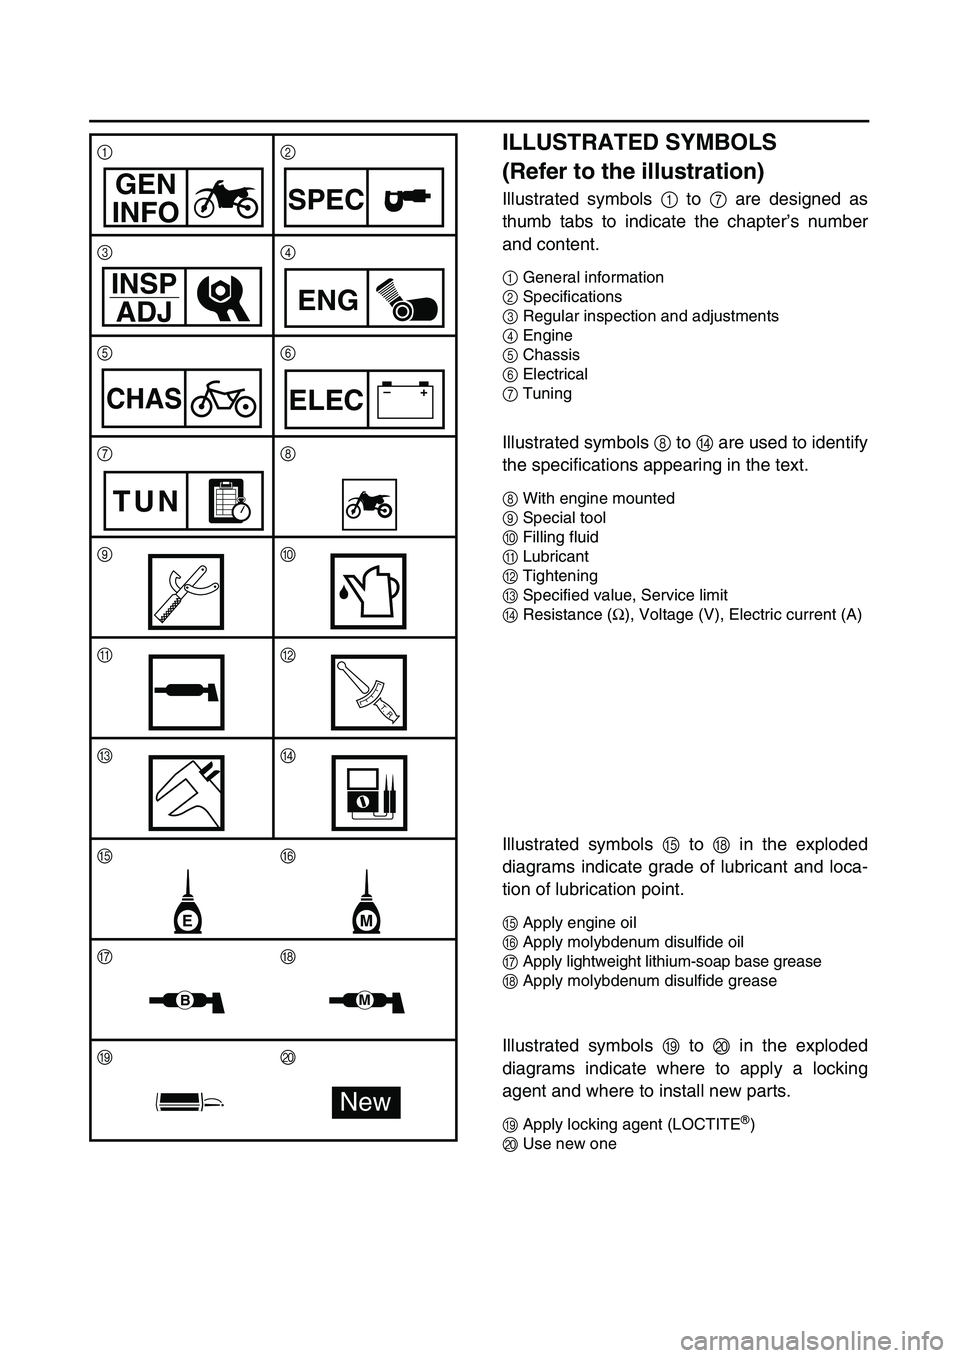 YAMAHA WR 400F 2002  Notices Demploi (in French)  
ILLUSTRATED SYMBOLS 
(Refer to the illustration) 
Illustrated symbols   
1  
 to   
7  
 are designed as
thumb tabs to indicate the chapter’s number
and content. 
1  
General information  
2  
Spe